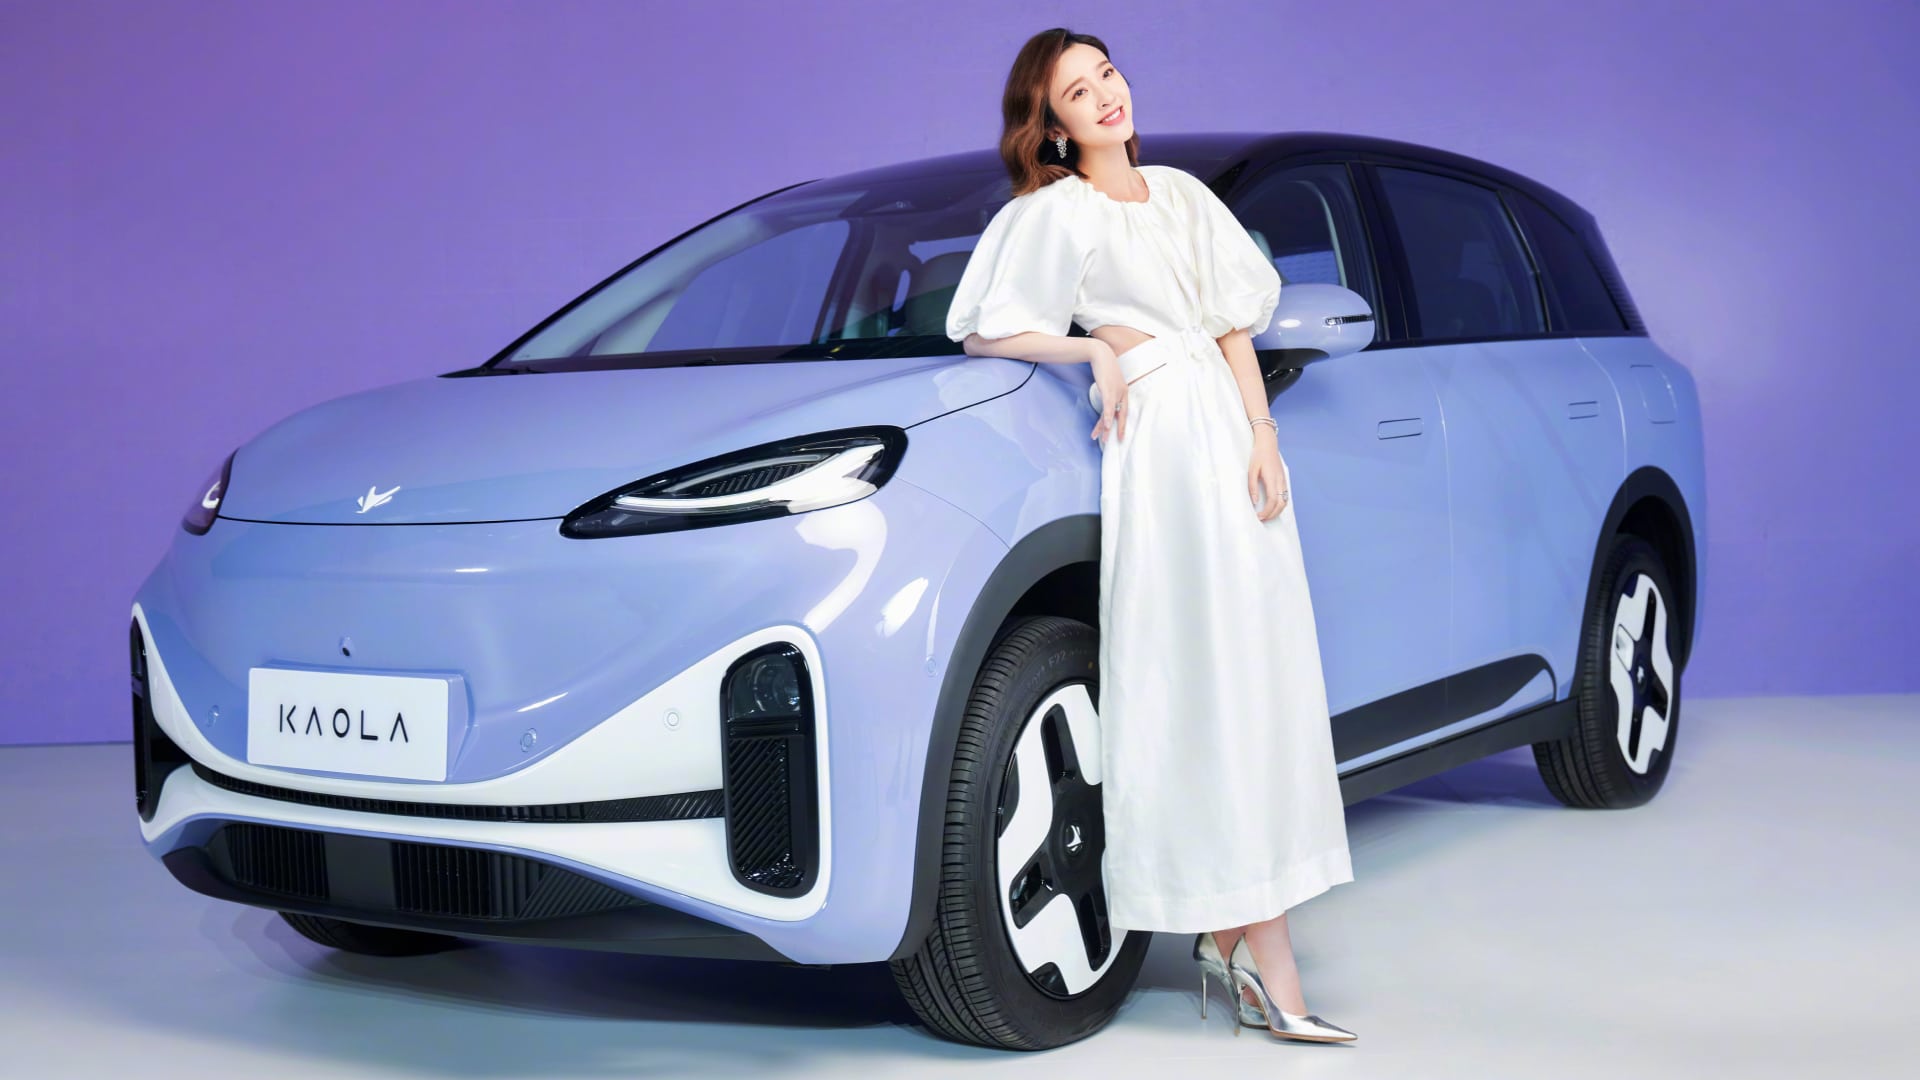 ArcFox Kaola launched in China as a car designed for mothers with babies